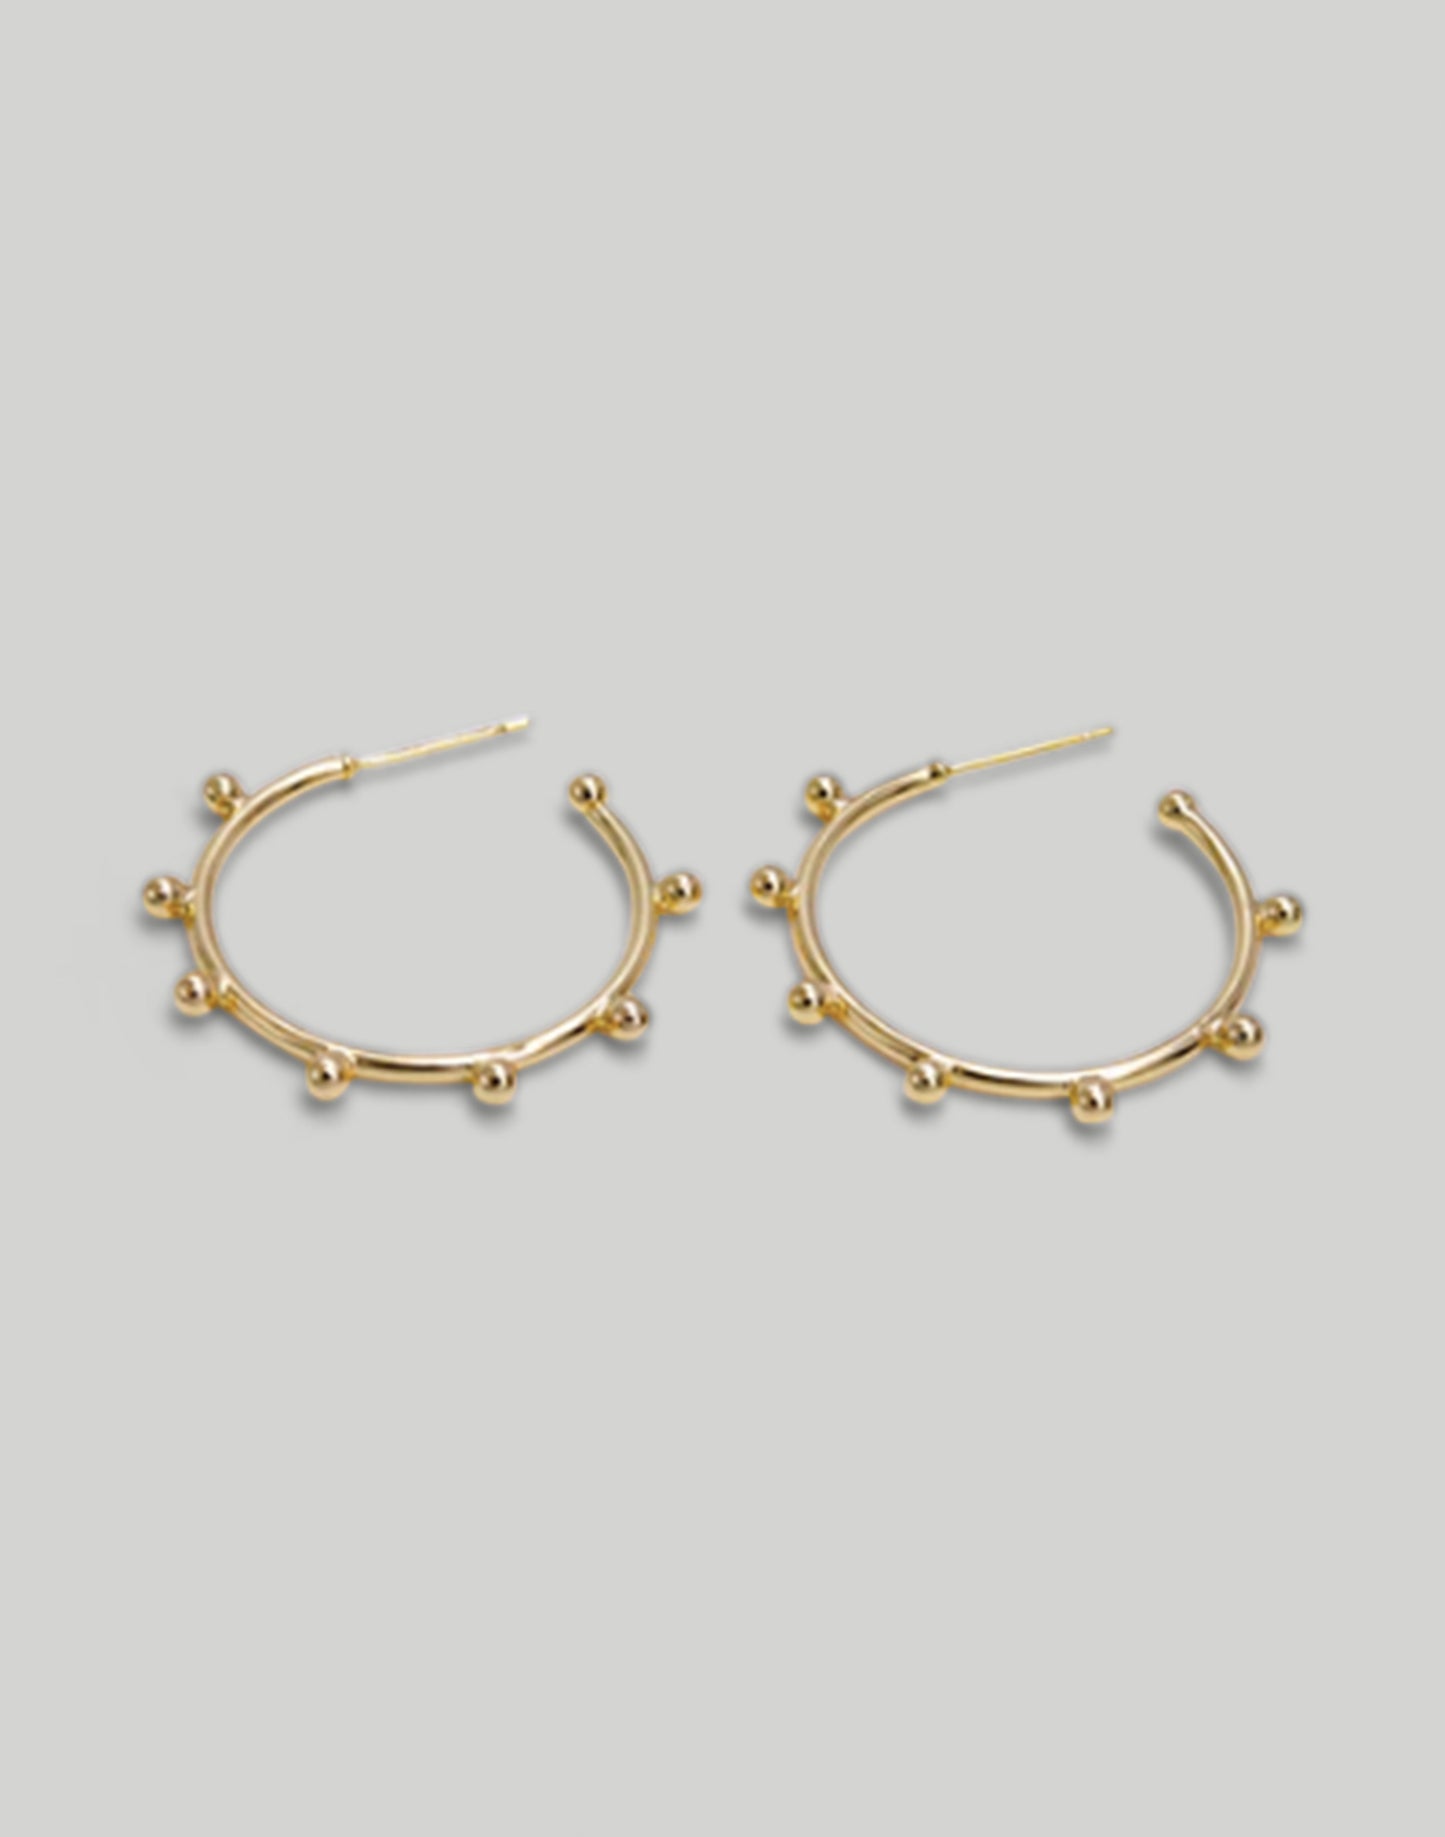 The Dotted Hoops